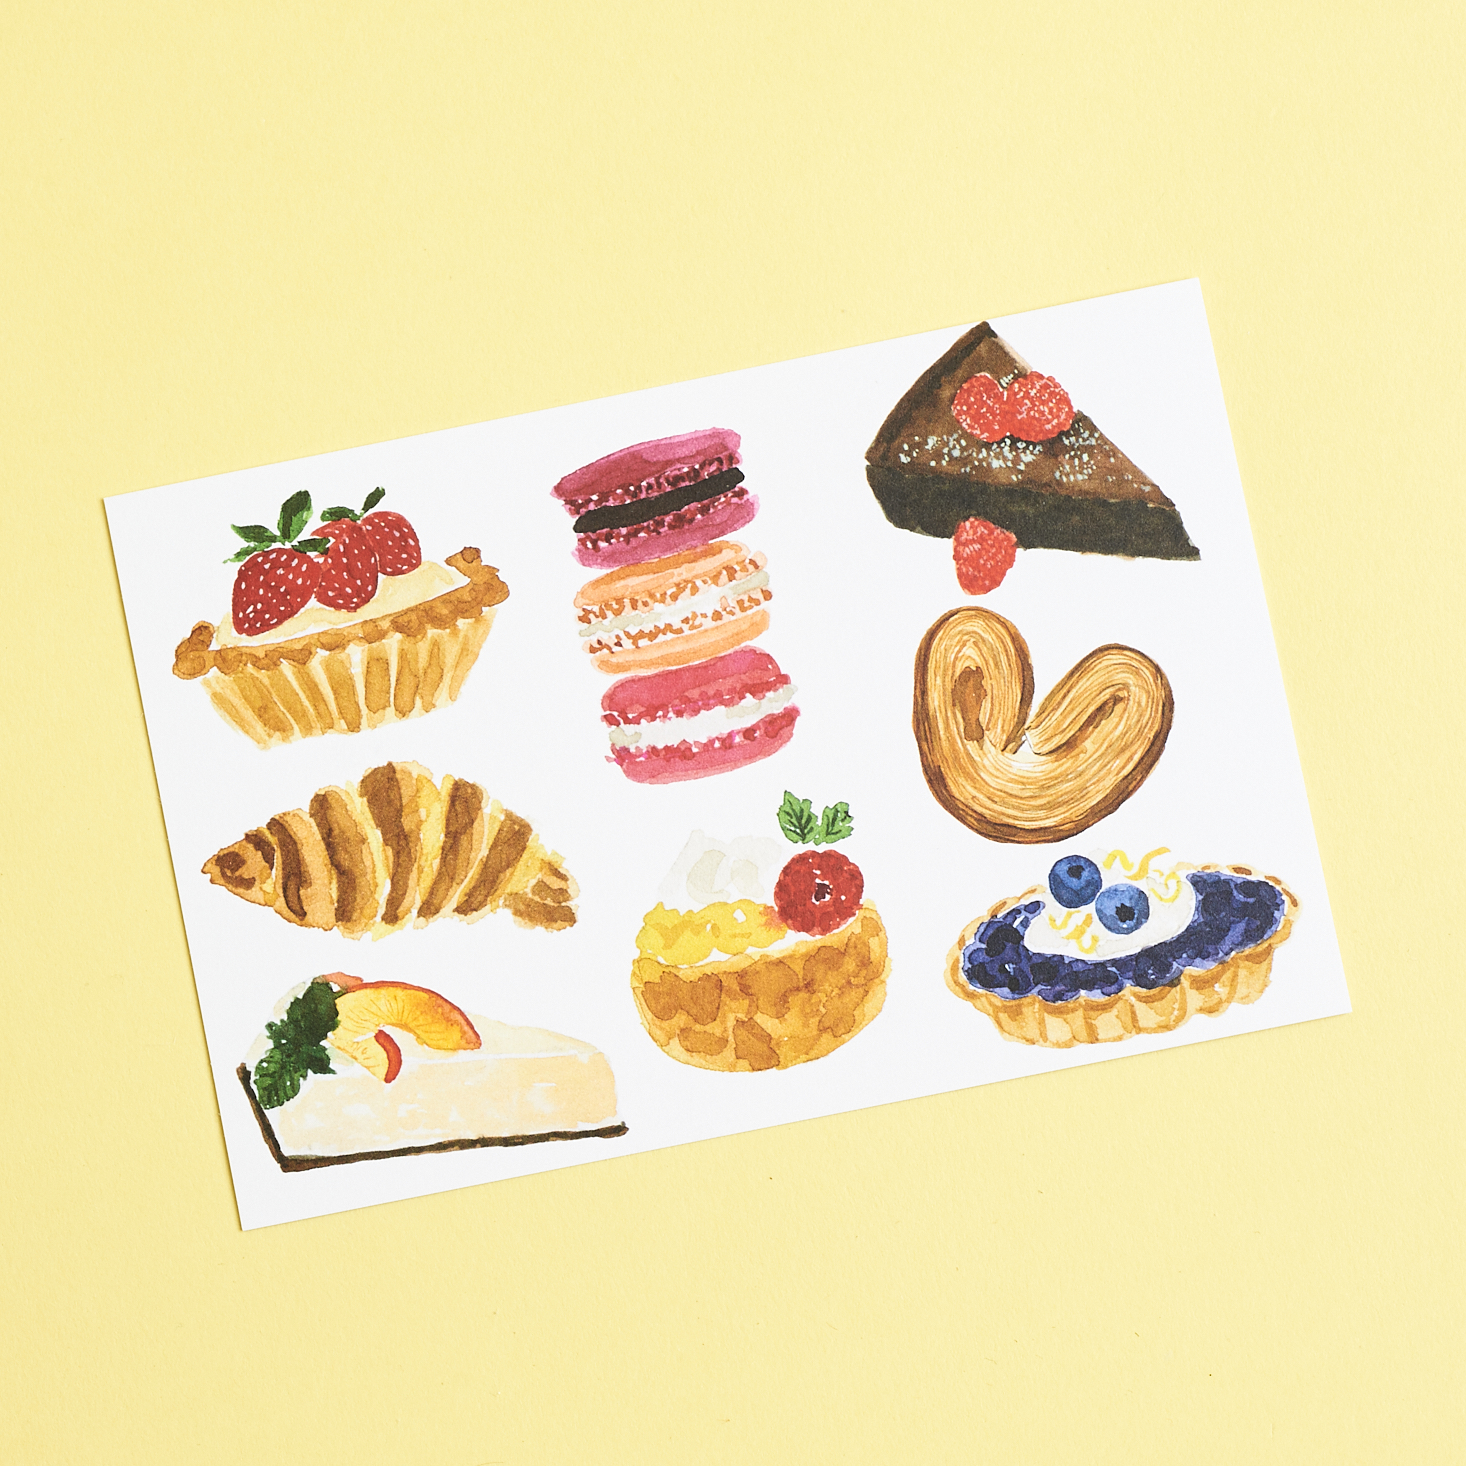 back of info sheet that shows various artwork depictions of food including macarons and a croissant